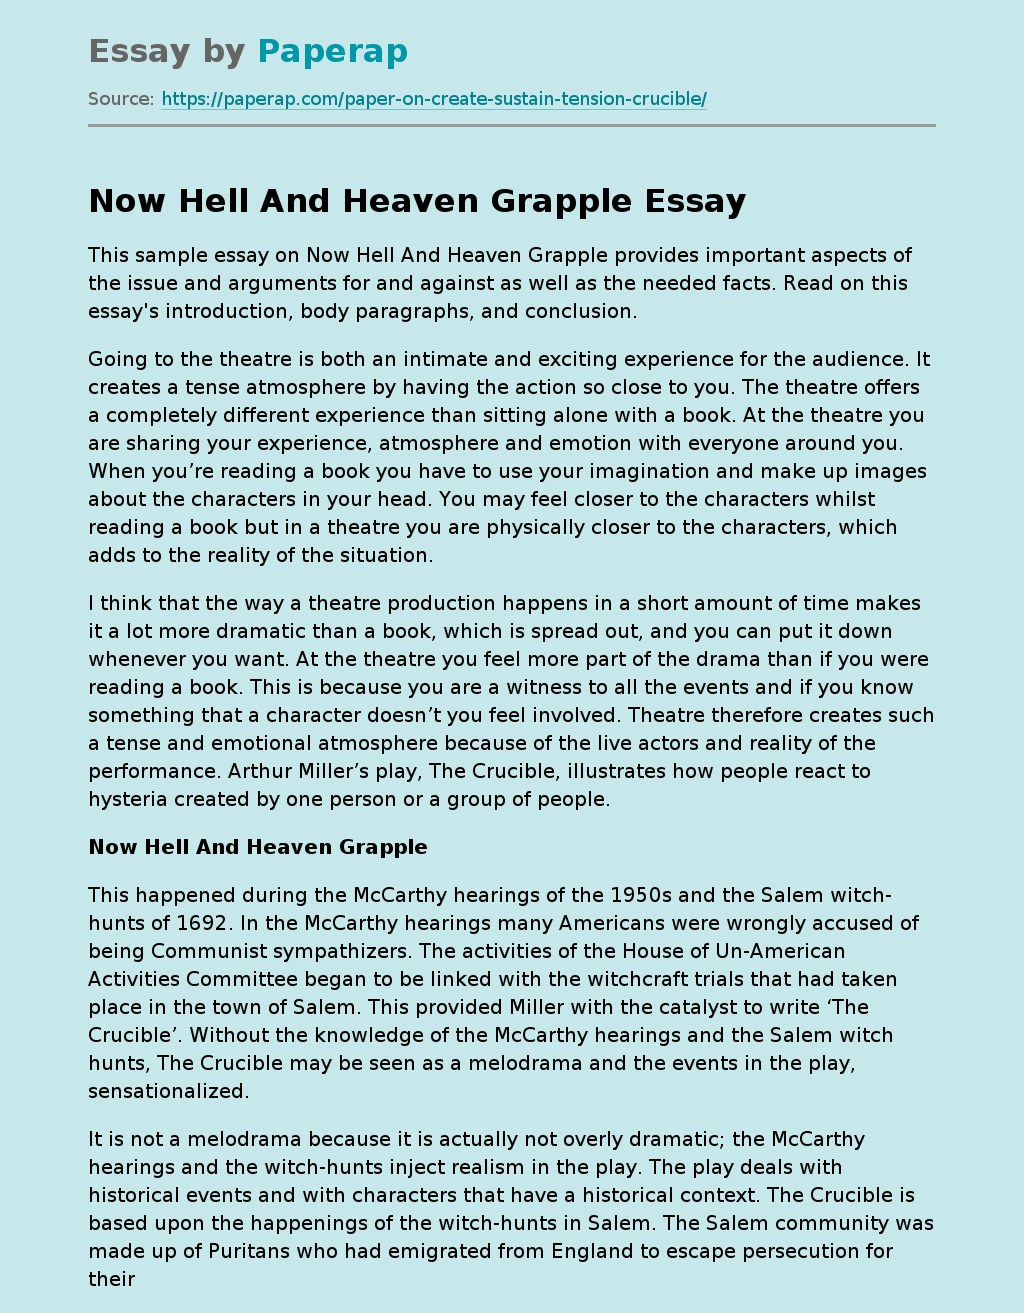 Now Hell And Heaven Grapple